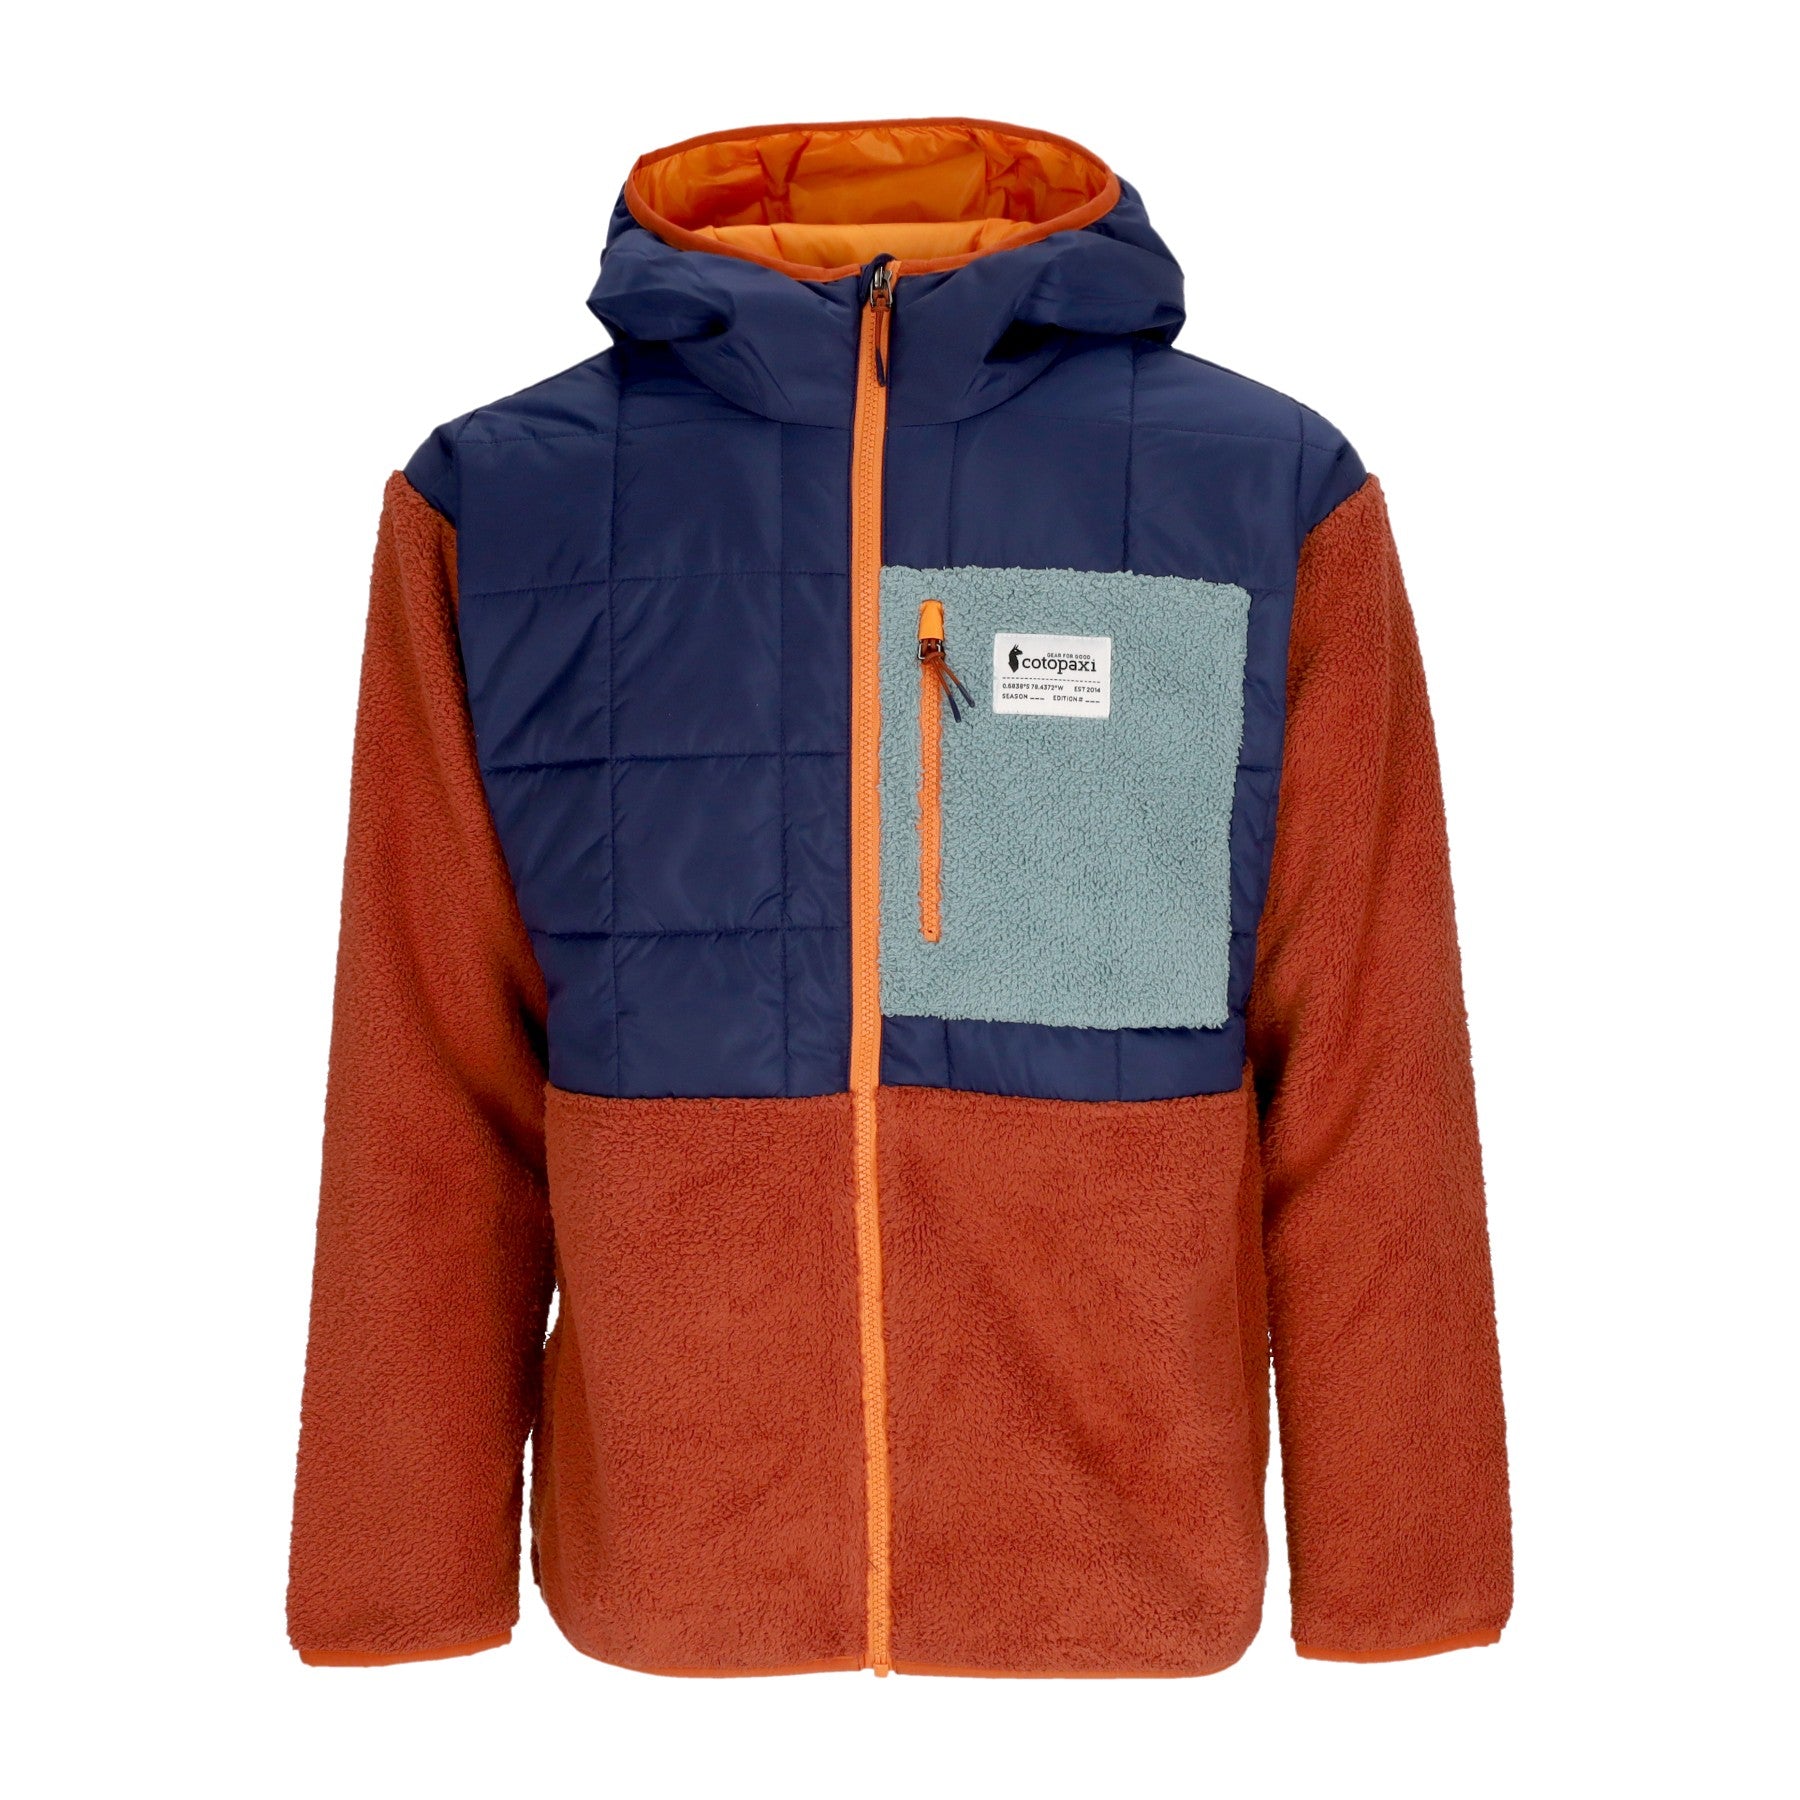 Cotopaxi, Orsetto Uomo Trico Hybrid Hooded Jacket, Maritime/spice